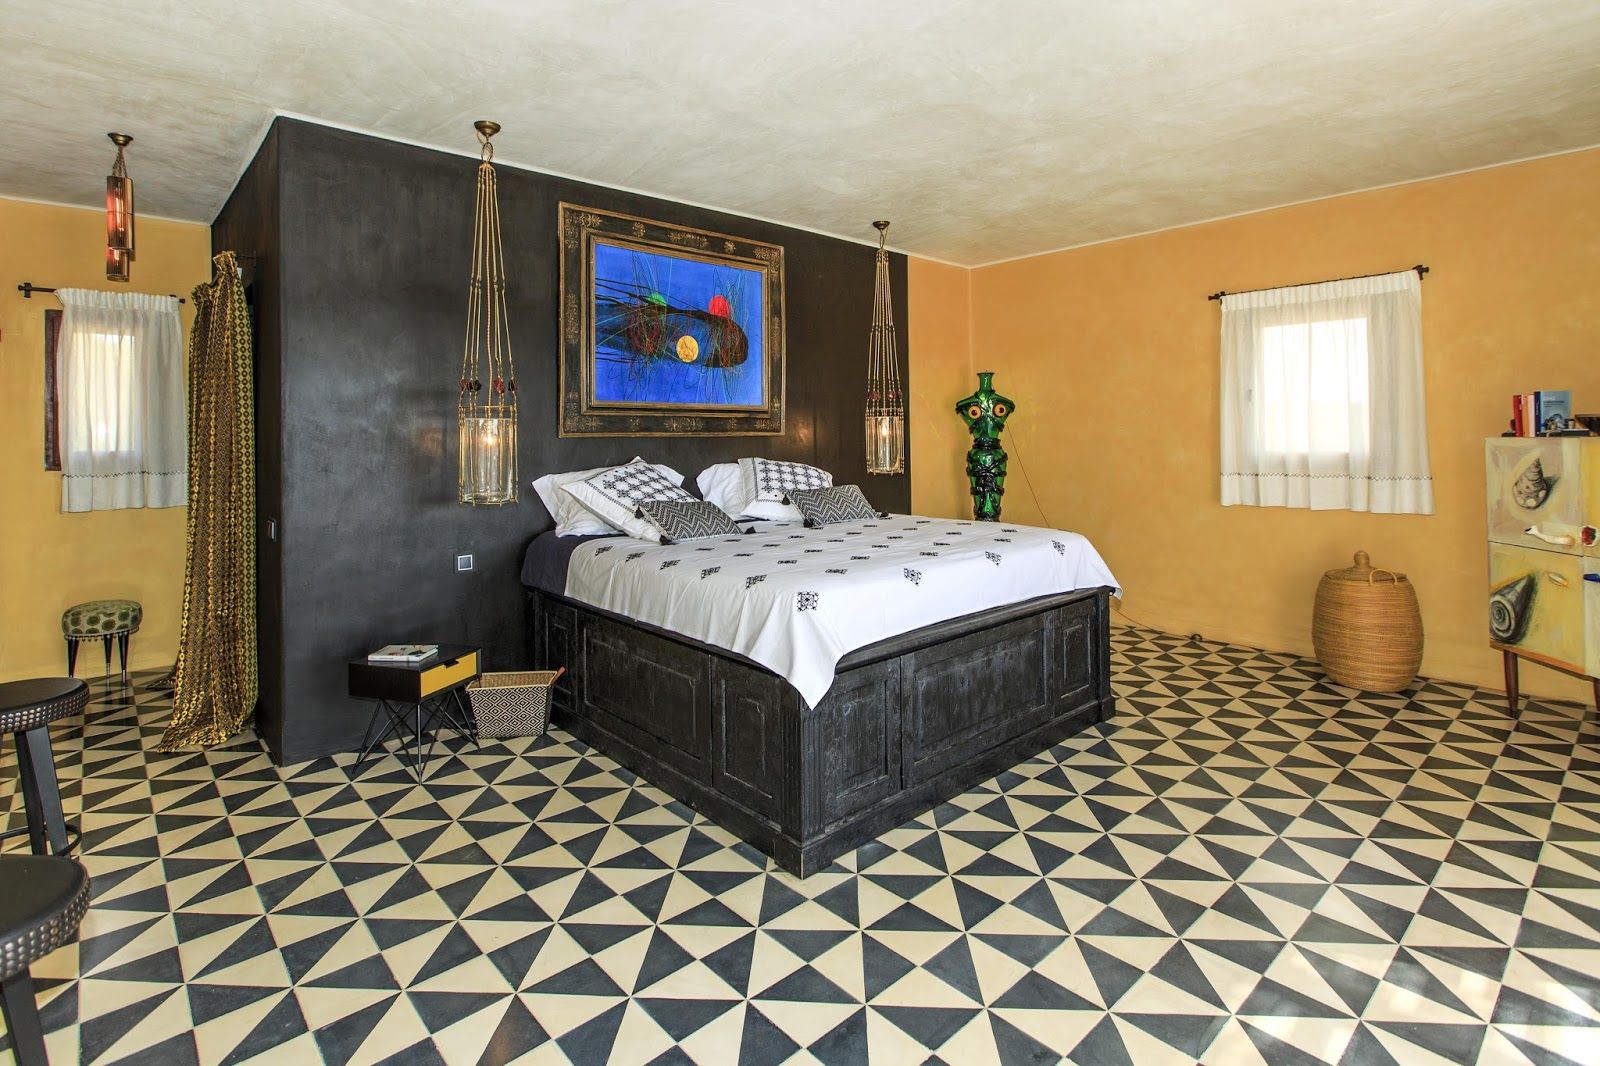 New Customer photos of cement tiles, Crafted Tiles Crafted Tiles Bedroom